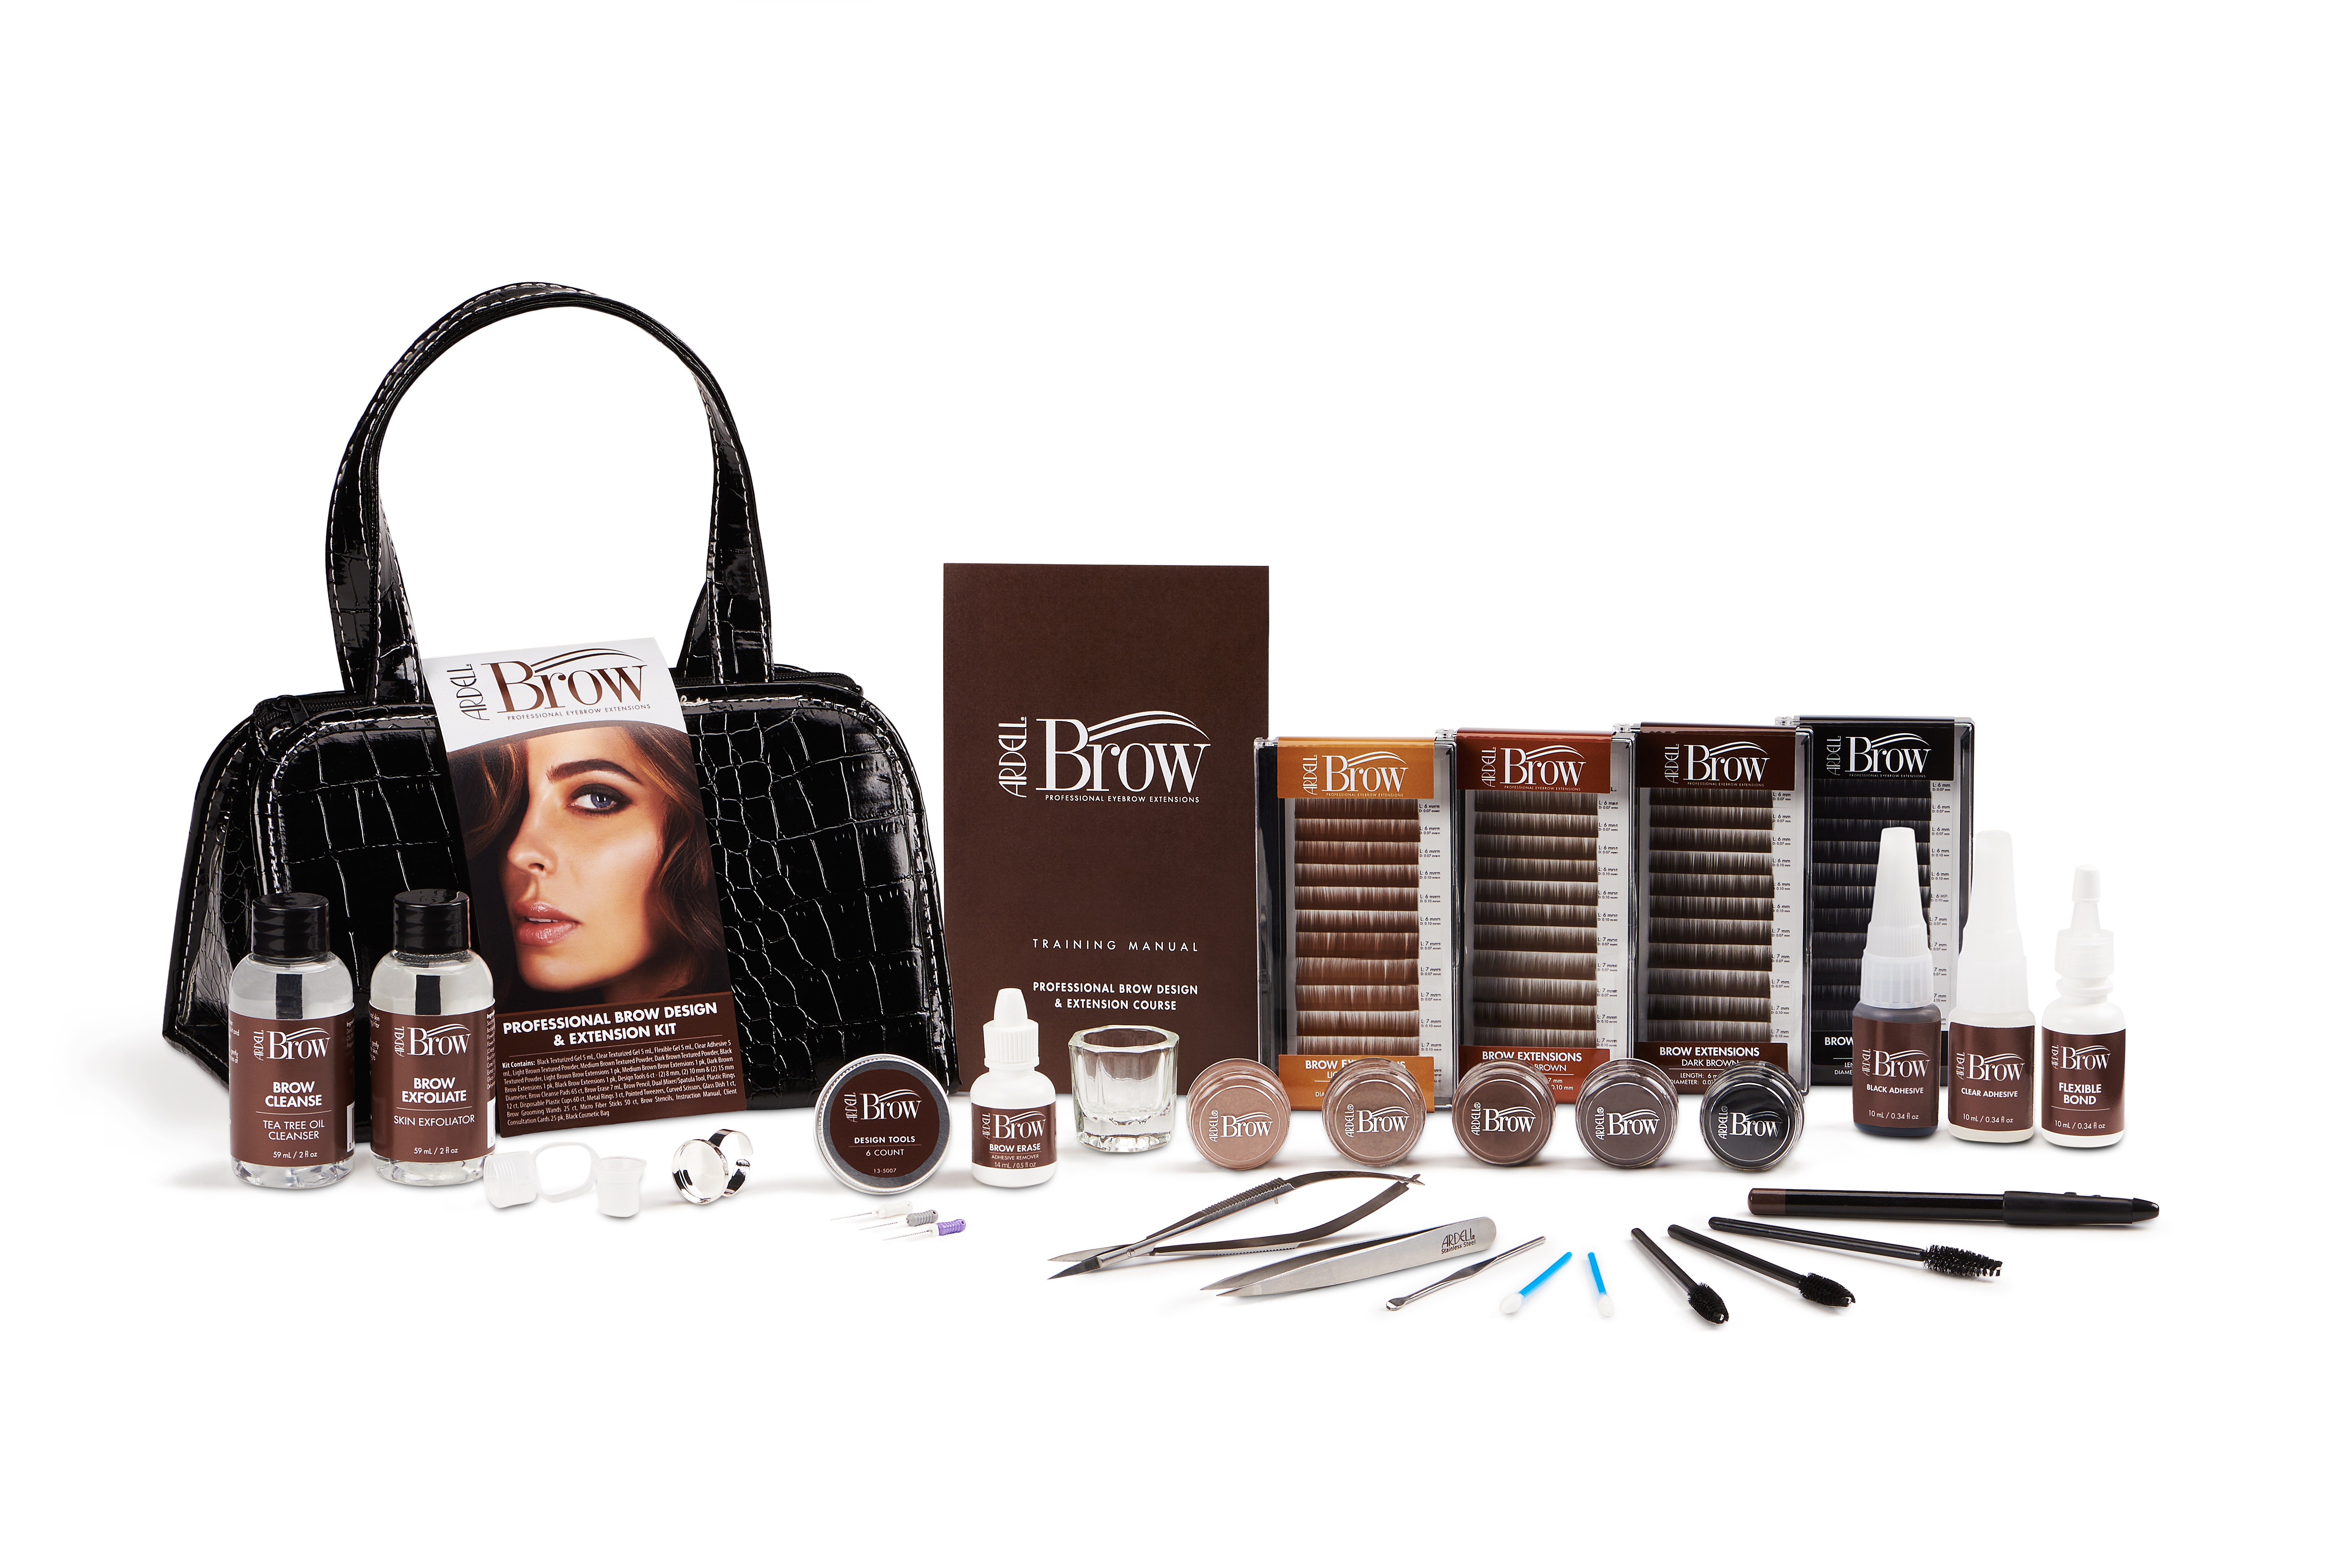 Ardell Professional Brow Design & Extension Kit